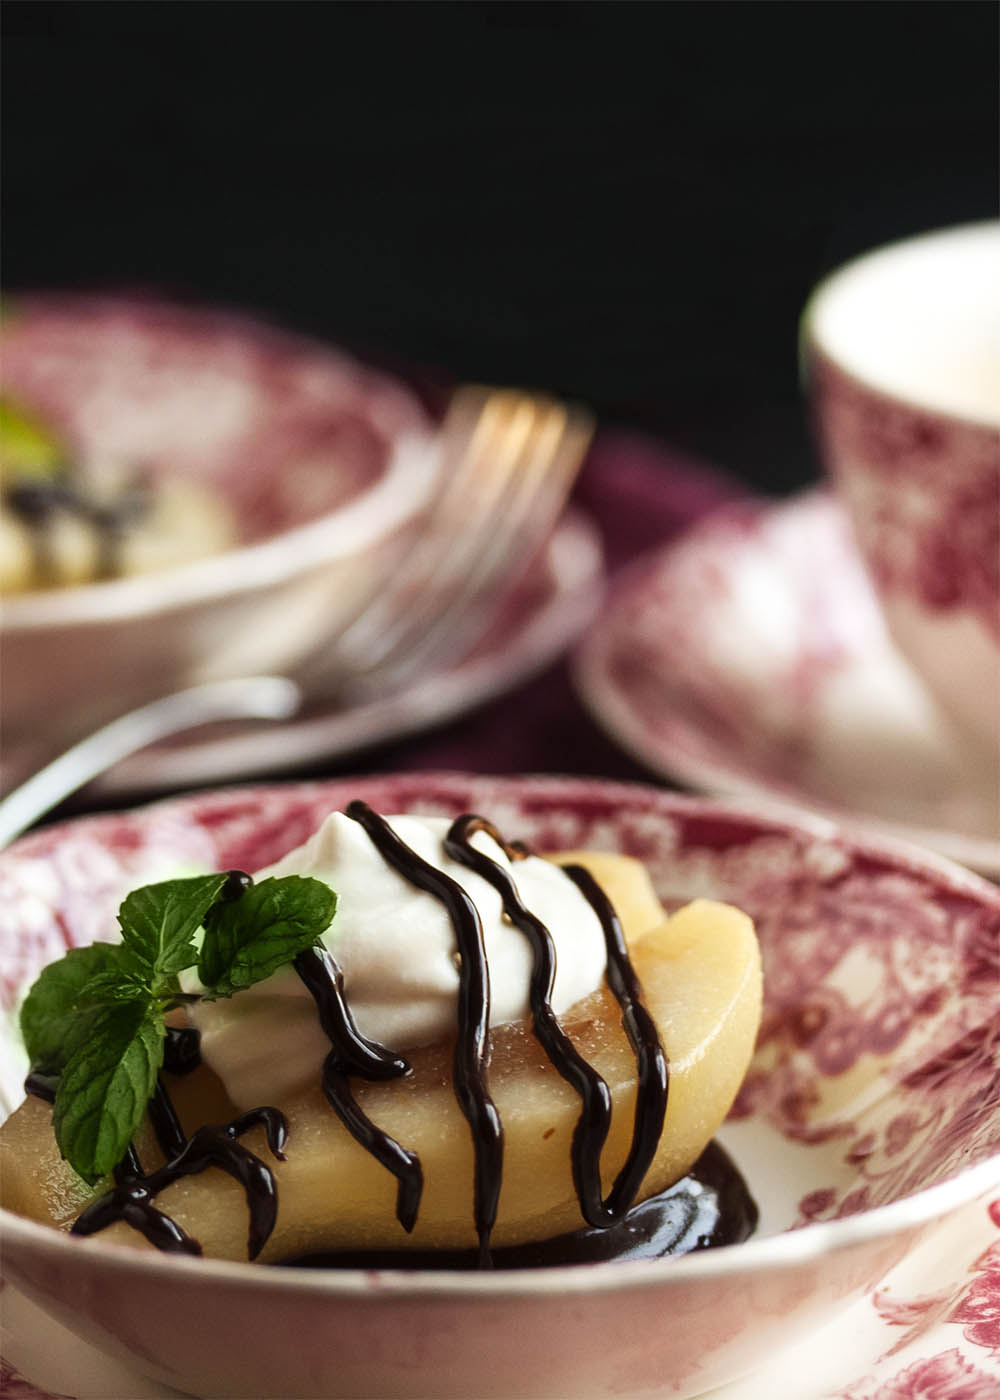 Poached Pears with Mascarpone Cream - These pears are poached in a spiced white wine syrup and then filled with mascarpone whipped cream and finished with a drizzle of bittersweet chocolate sauce. A wonderful way to end a holiday meal! | justalittlebitofbacon.com